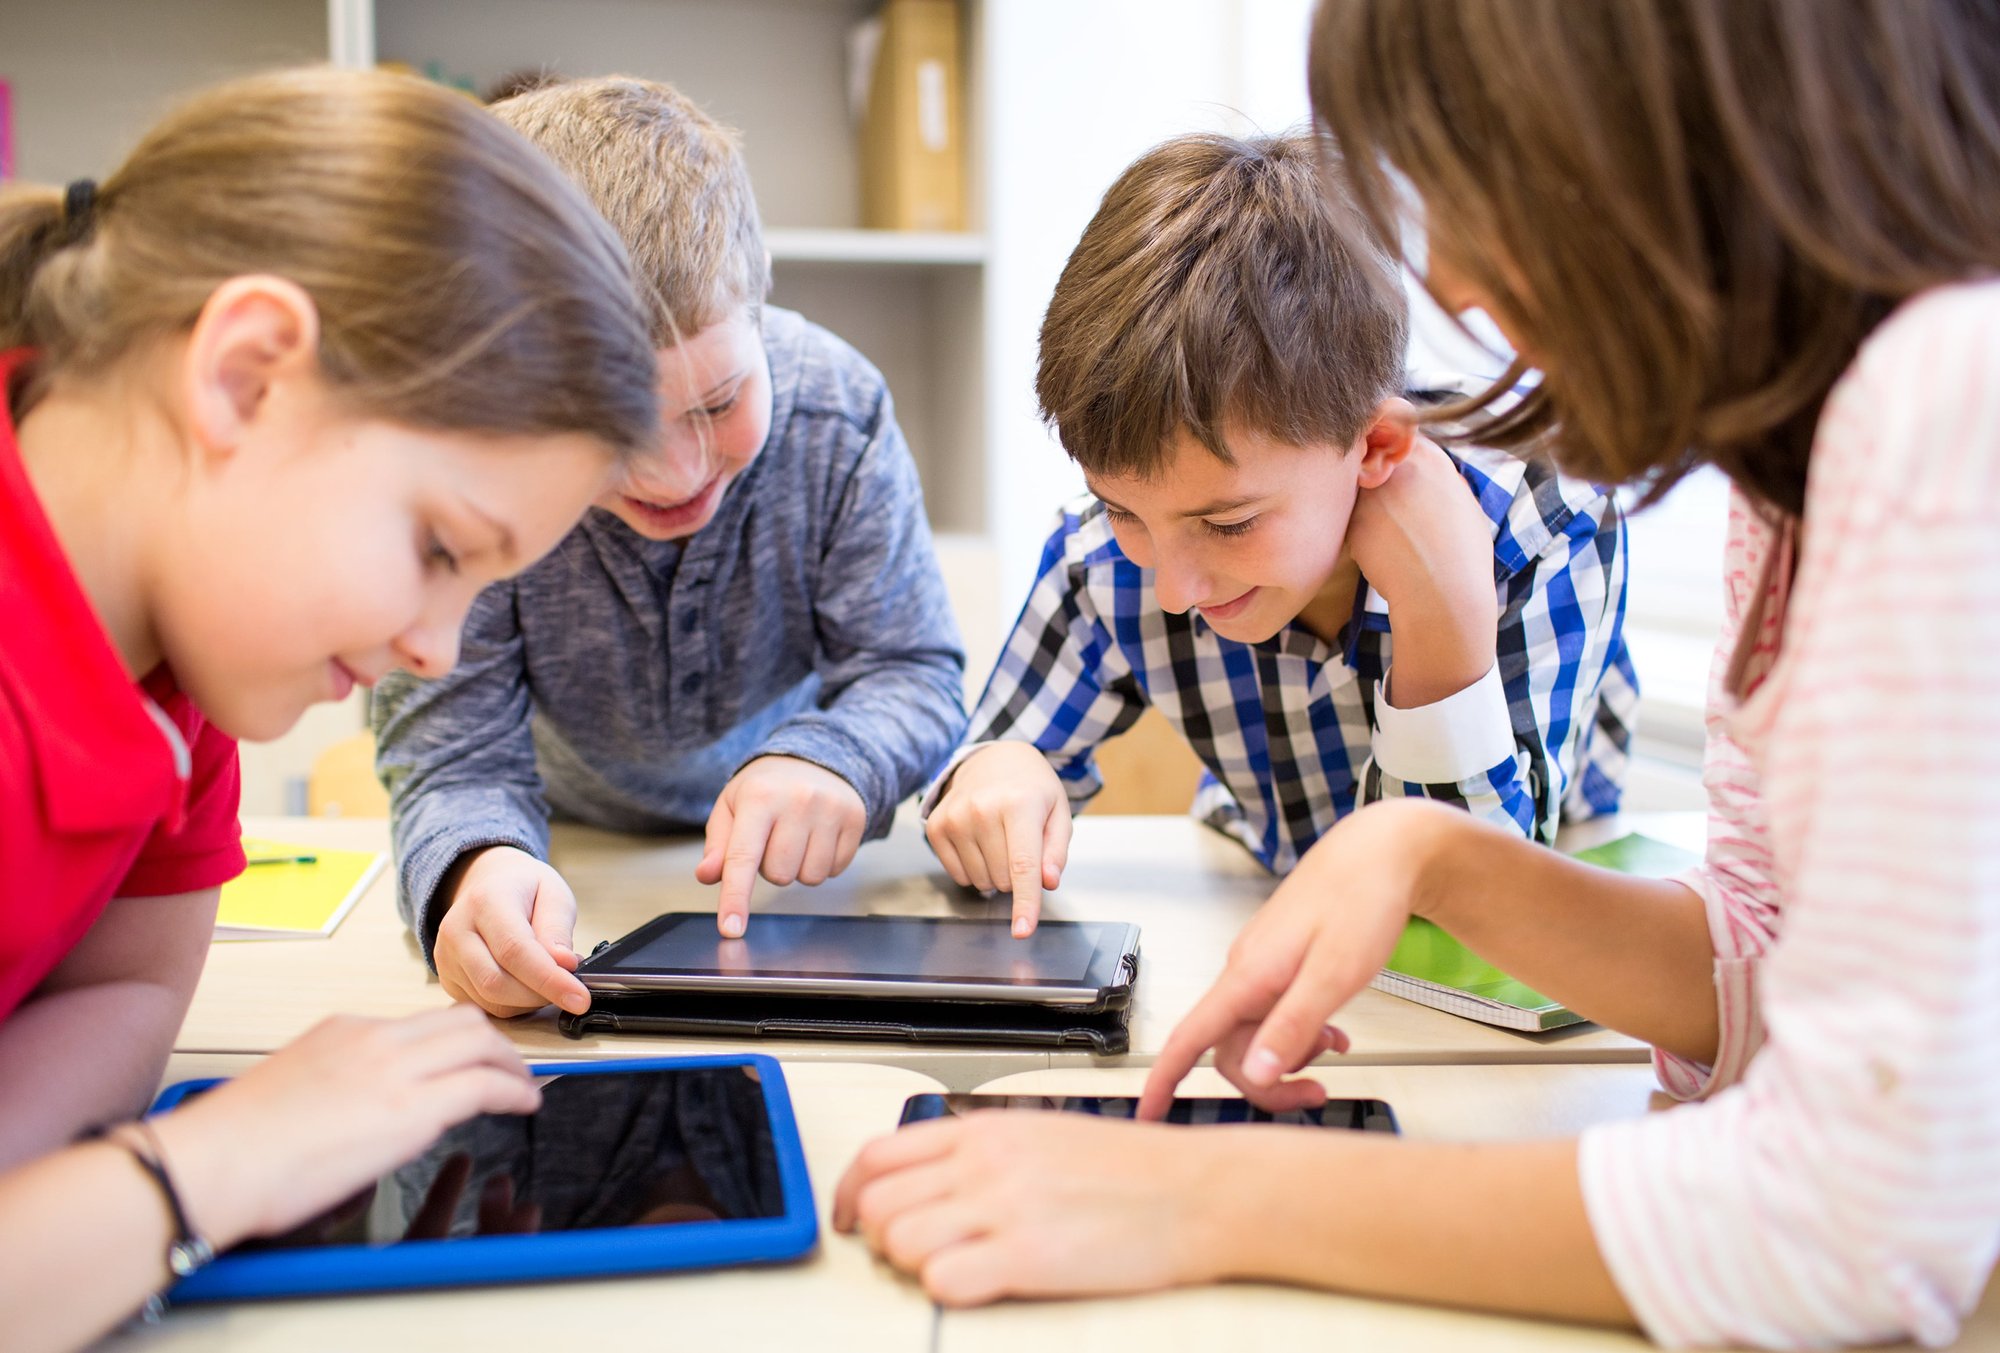 education-elementary-school-learning-technology-people-concept-group-school-kids-with-tablet-pc-computer-having-fun-break-clas